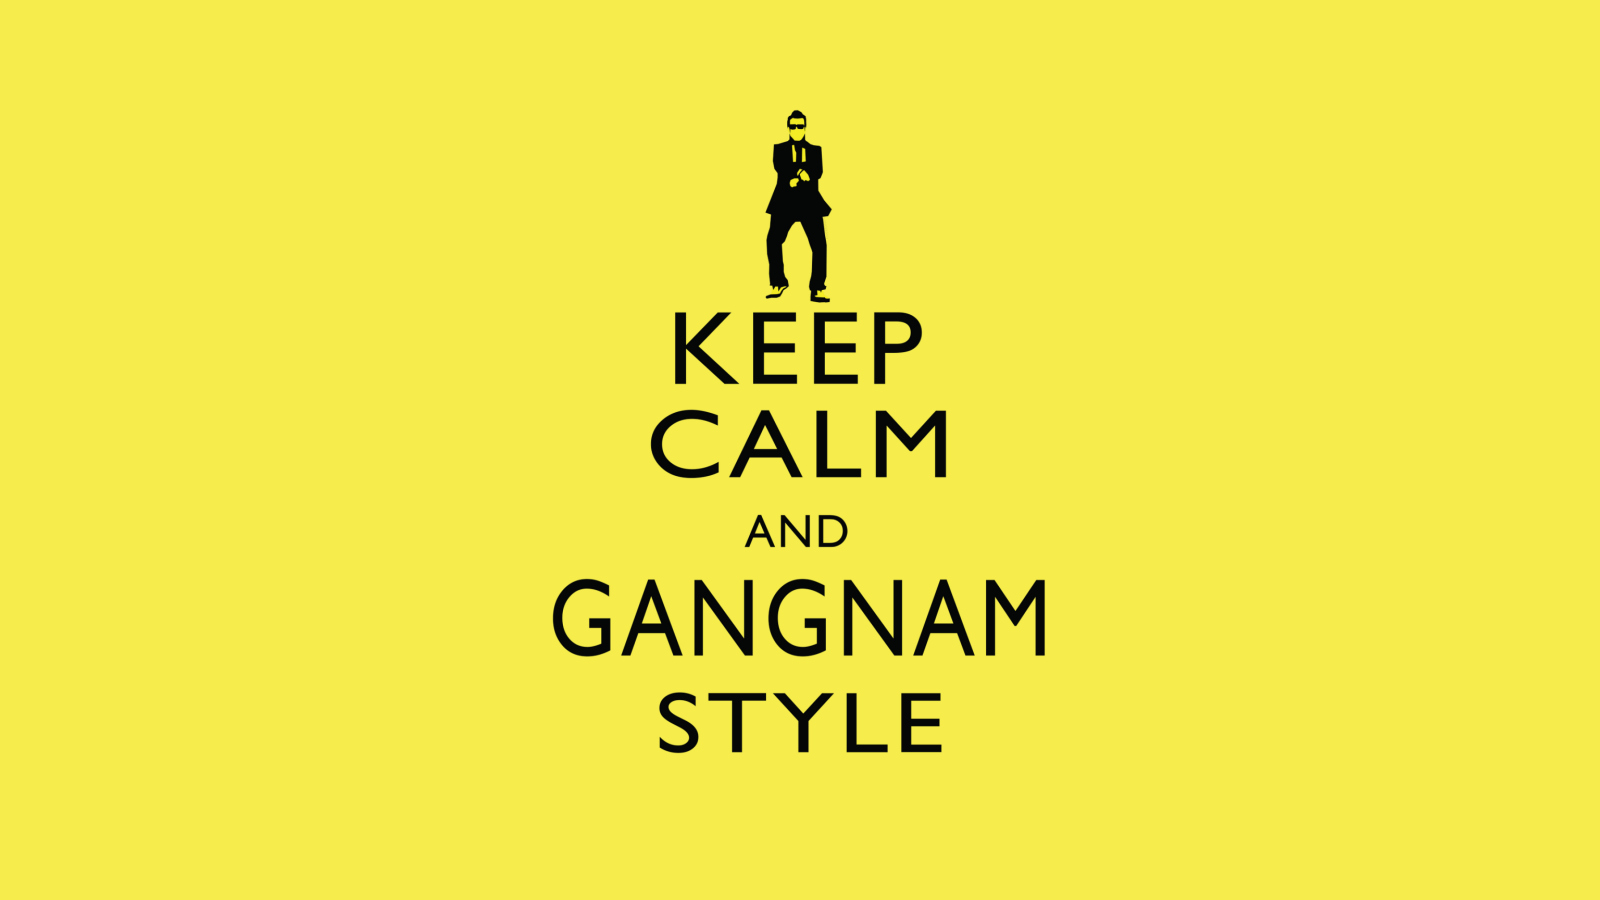 Keep Calm And Gangnam Style wallpaper 1600x900